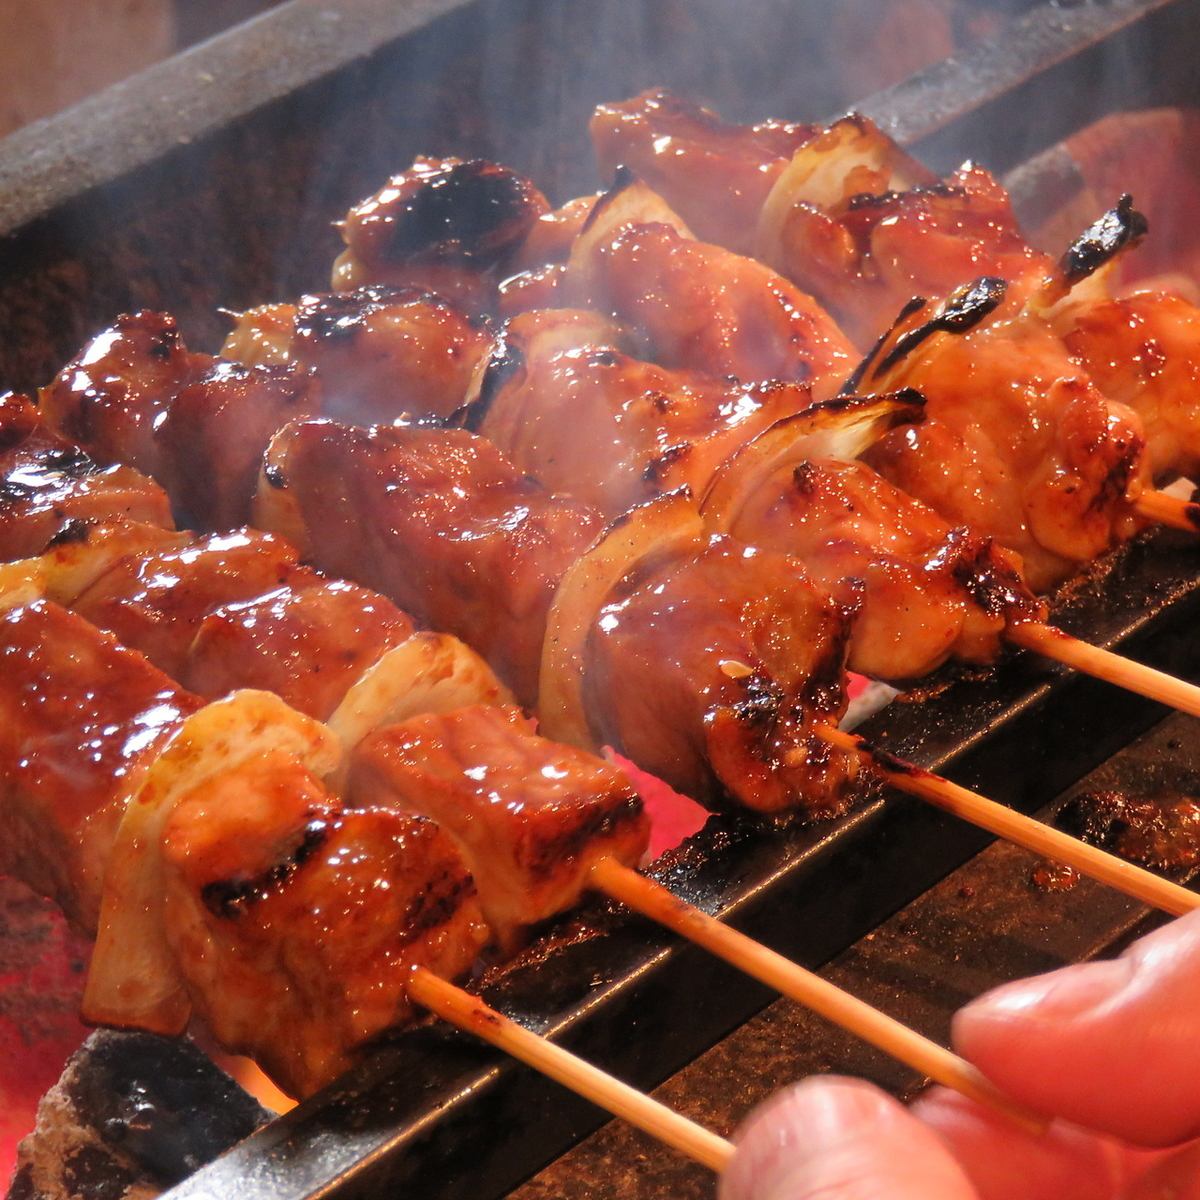 If you want to eat authentic Muroran yakitori, here! 20 kinds of blended homemade sauce is irresistible!